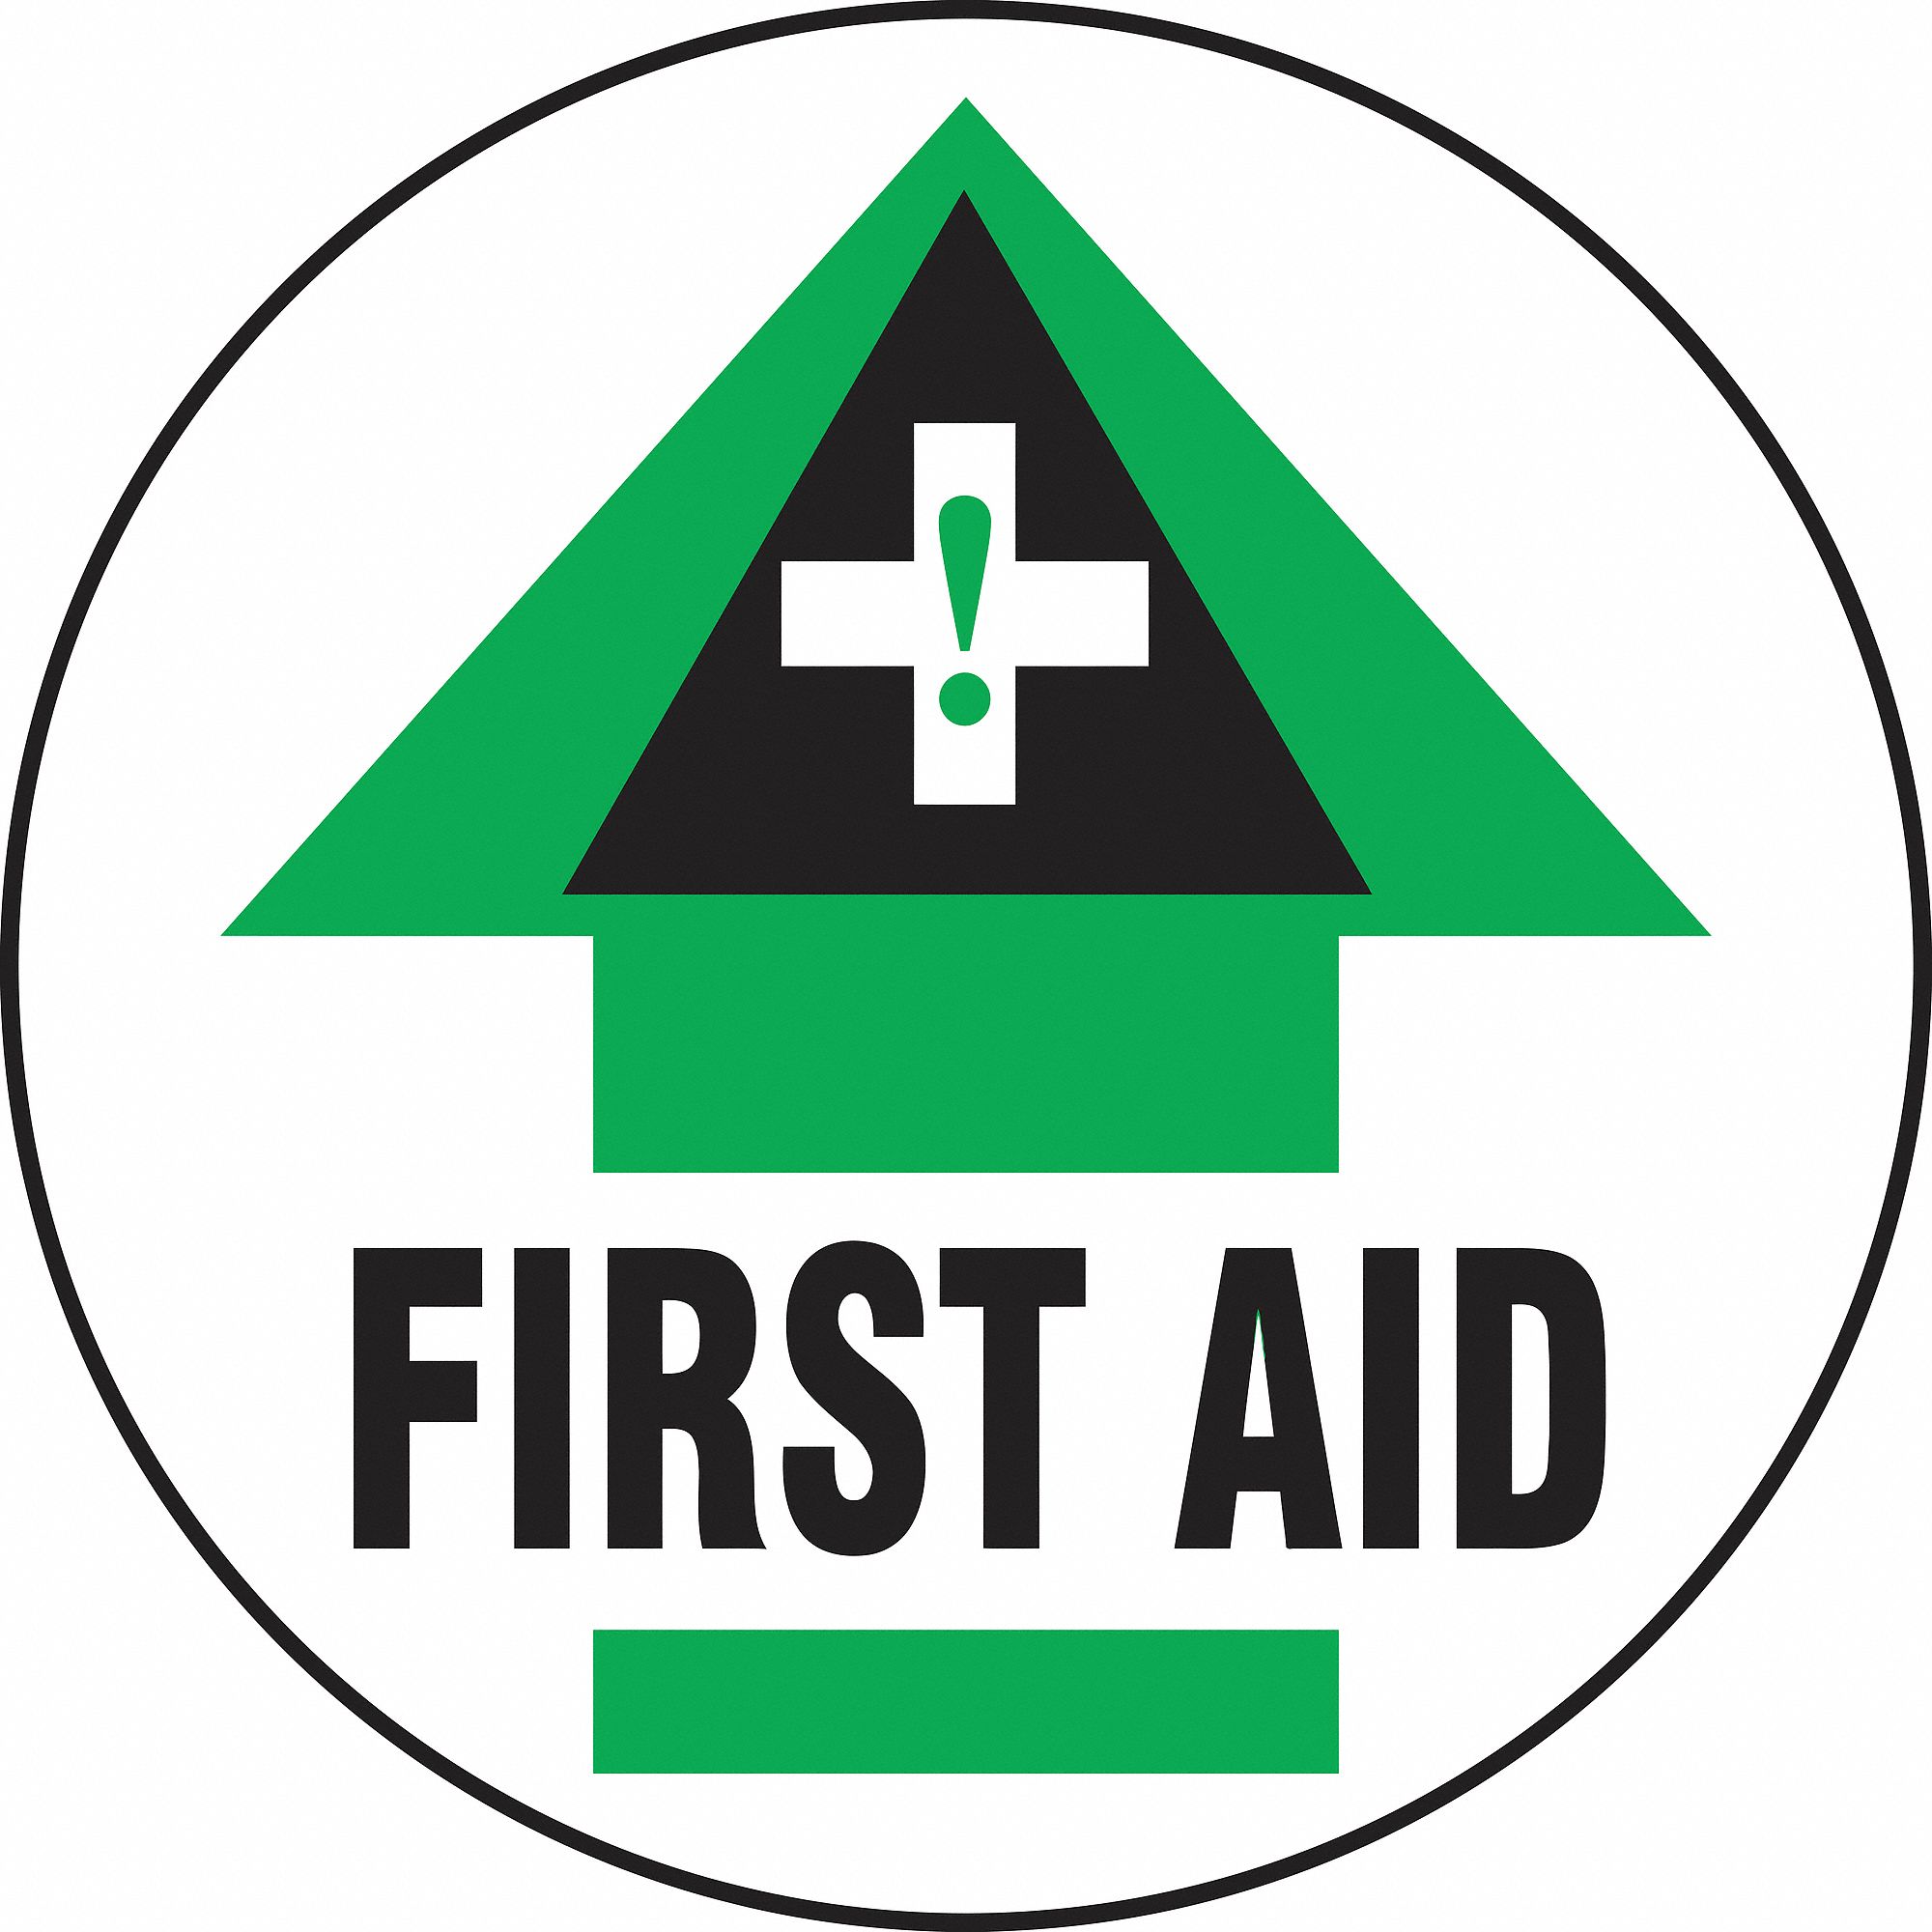 Floor Sign,First Aid,17 In. Dia.